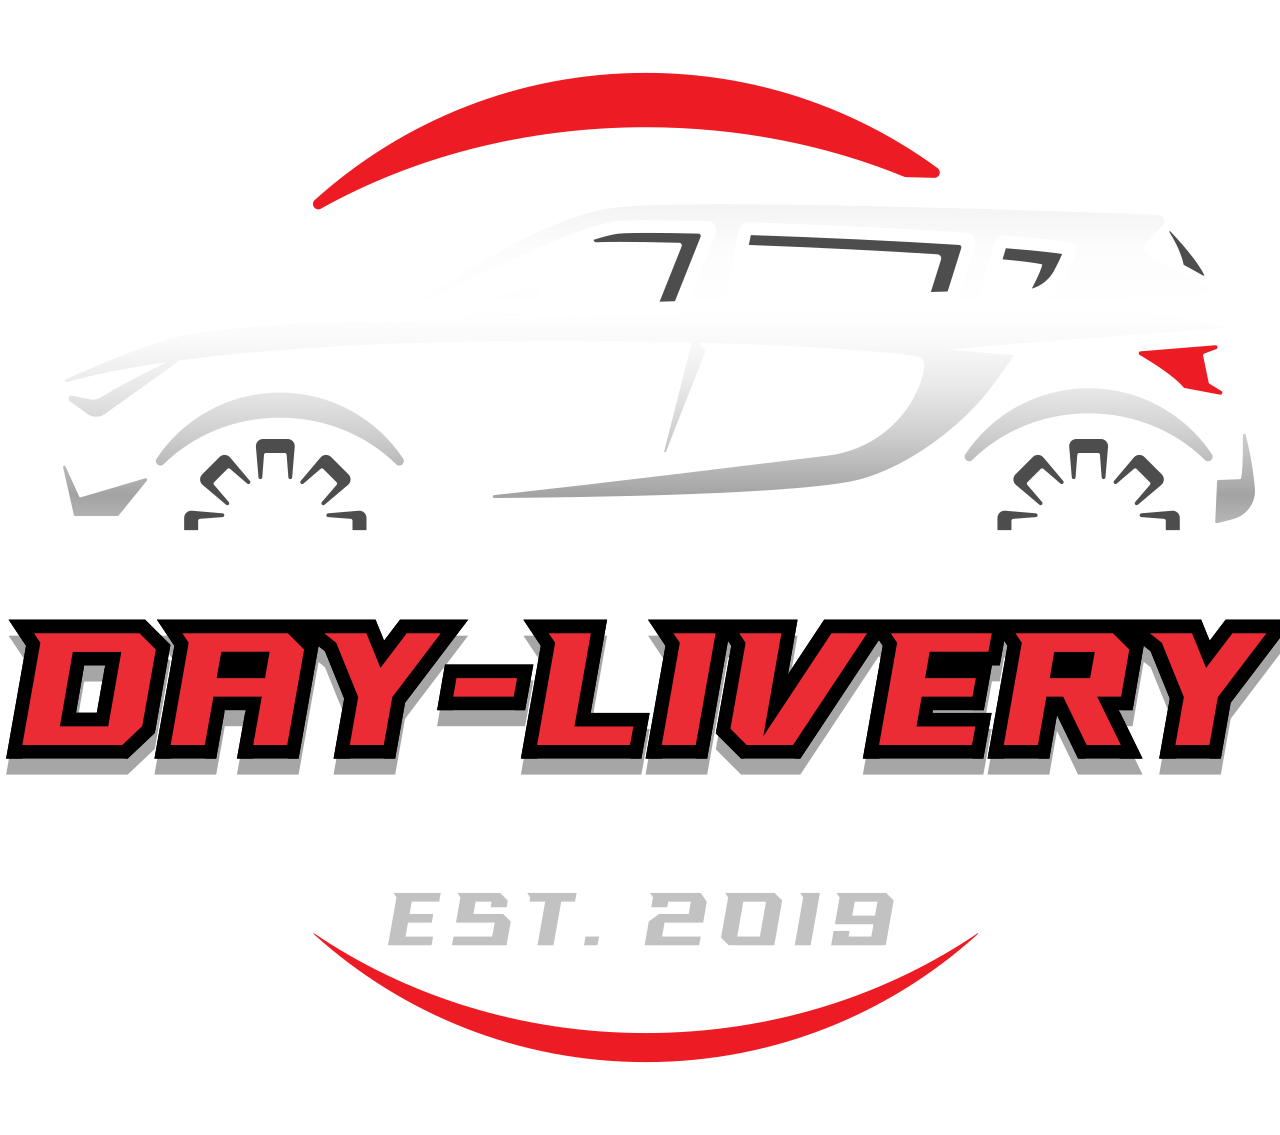 Day-Livery's logo